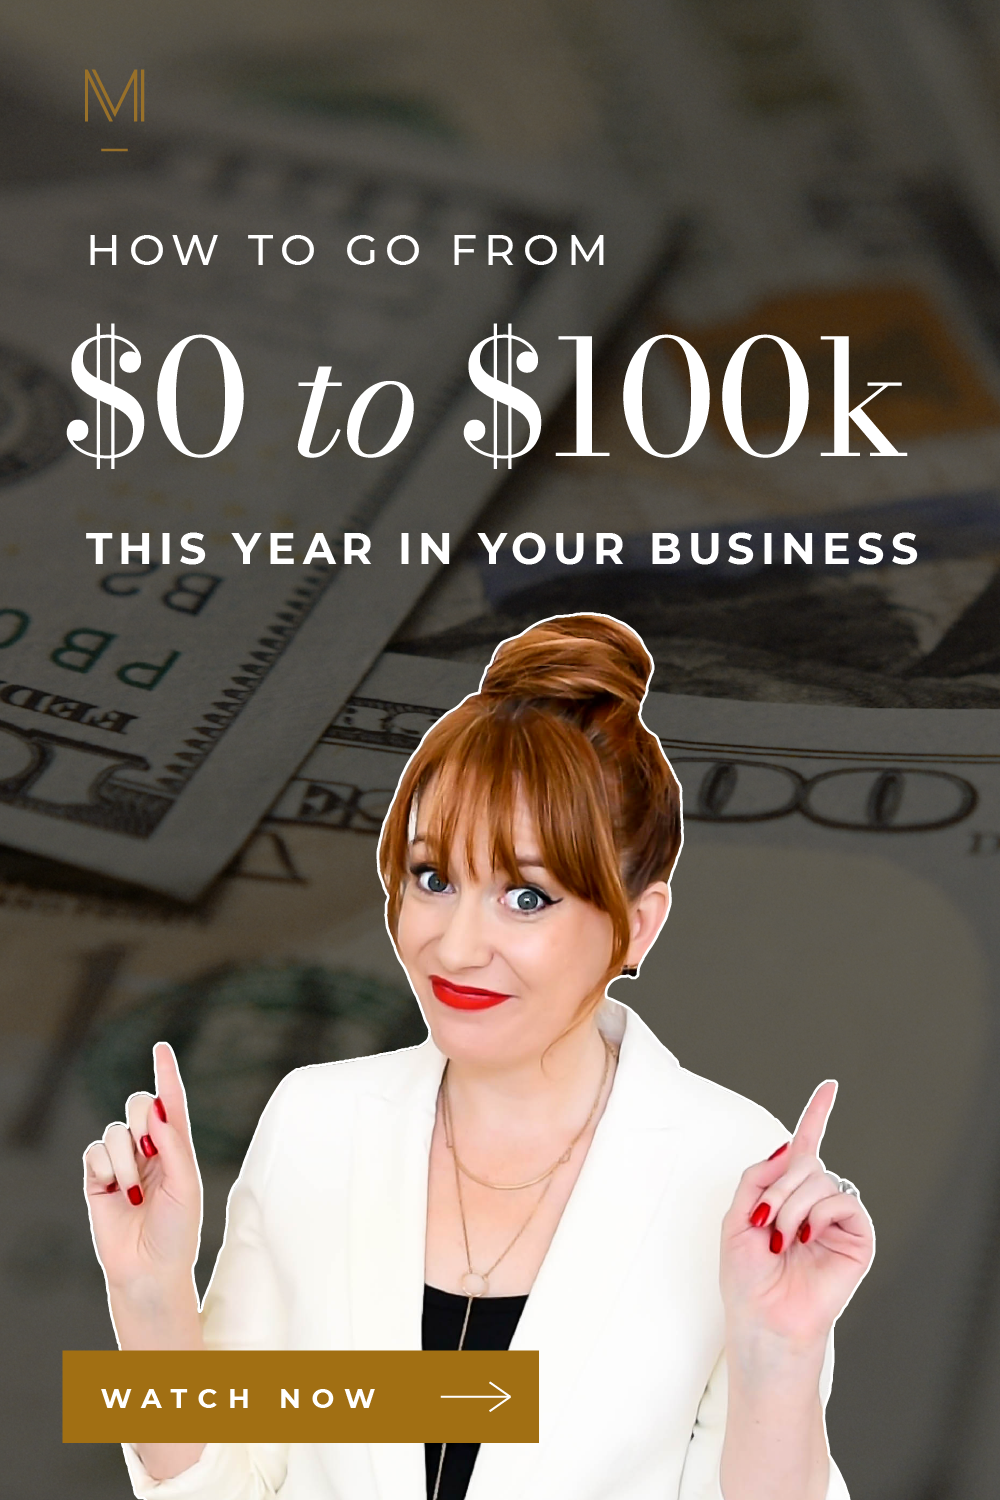 Wondering how to make 100k in your online business? This video is for you! I’m sharing my own journey to building a 6-figure online business—including how to make your FIRST 100k as a life coach, how to build your online coaching business for success, and how to make 100k a year. #business #success #entrepreneur #entrepreneurtips